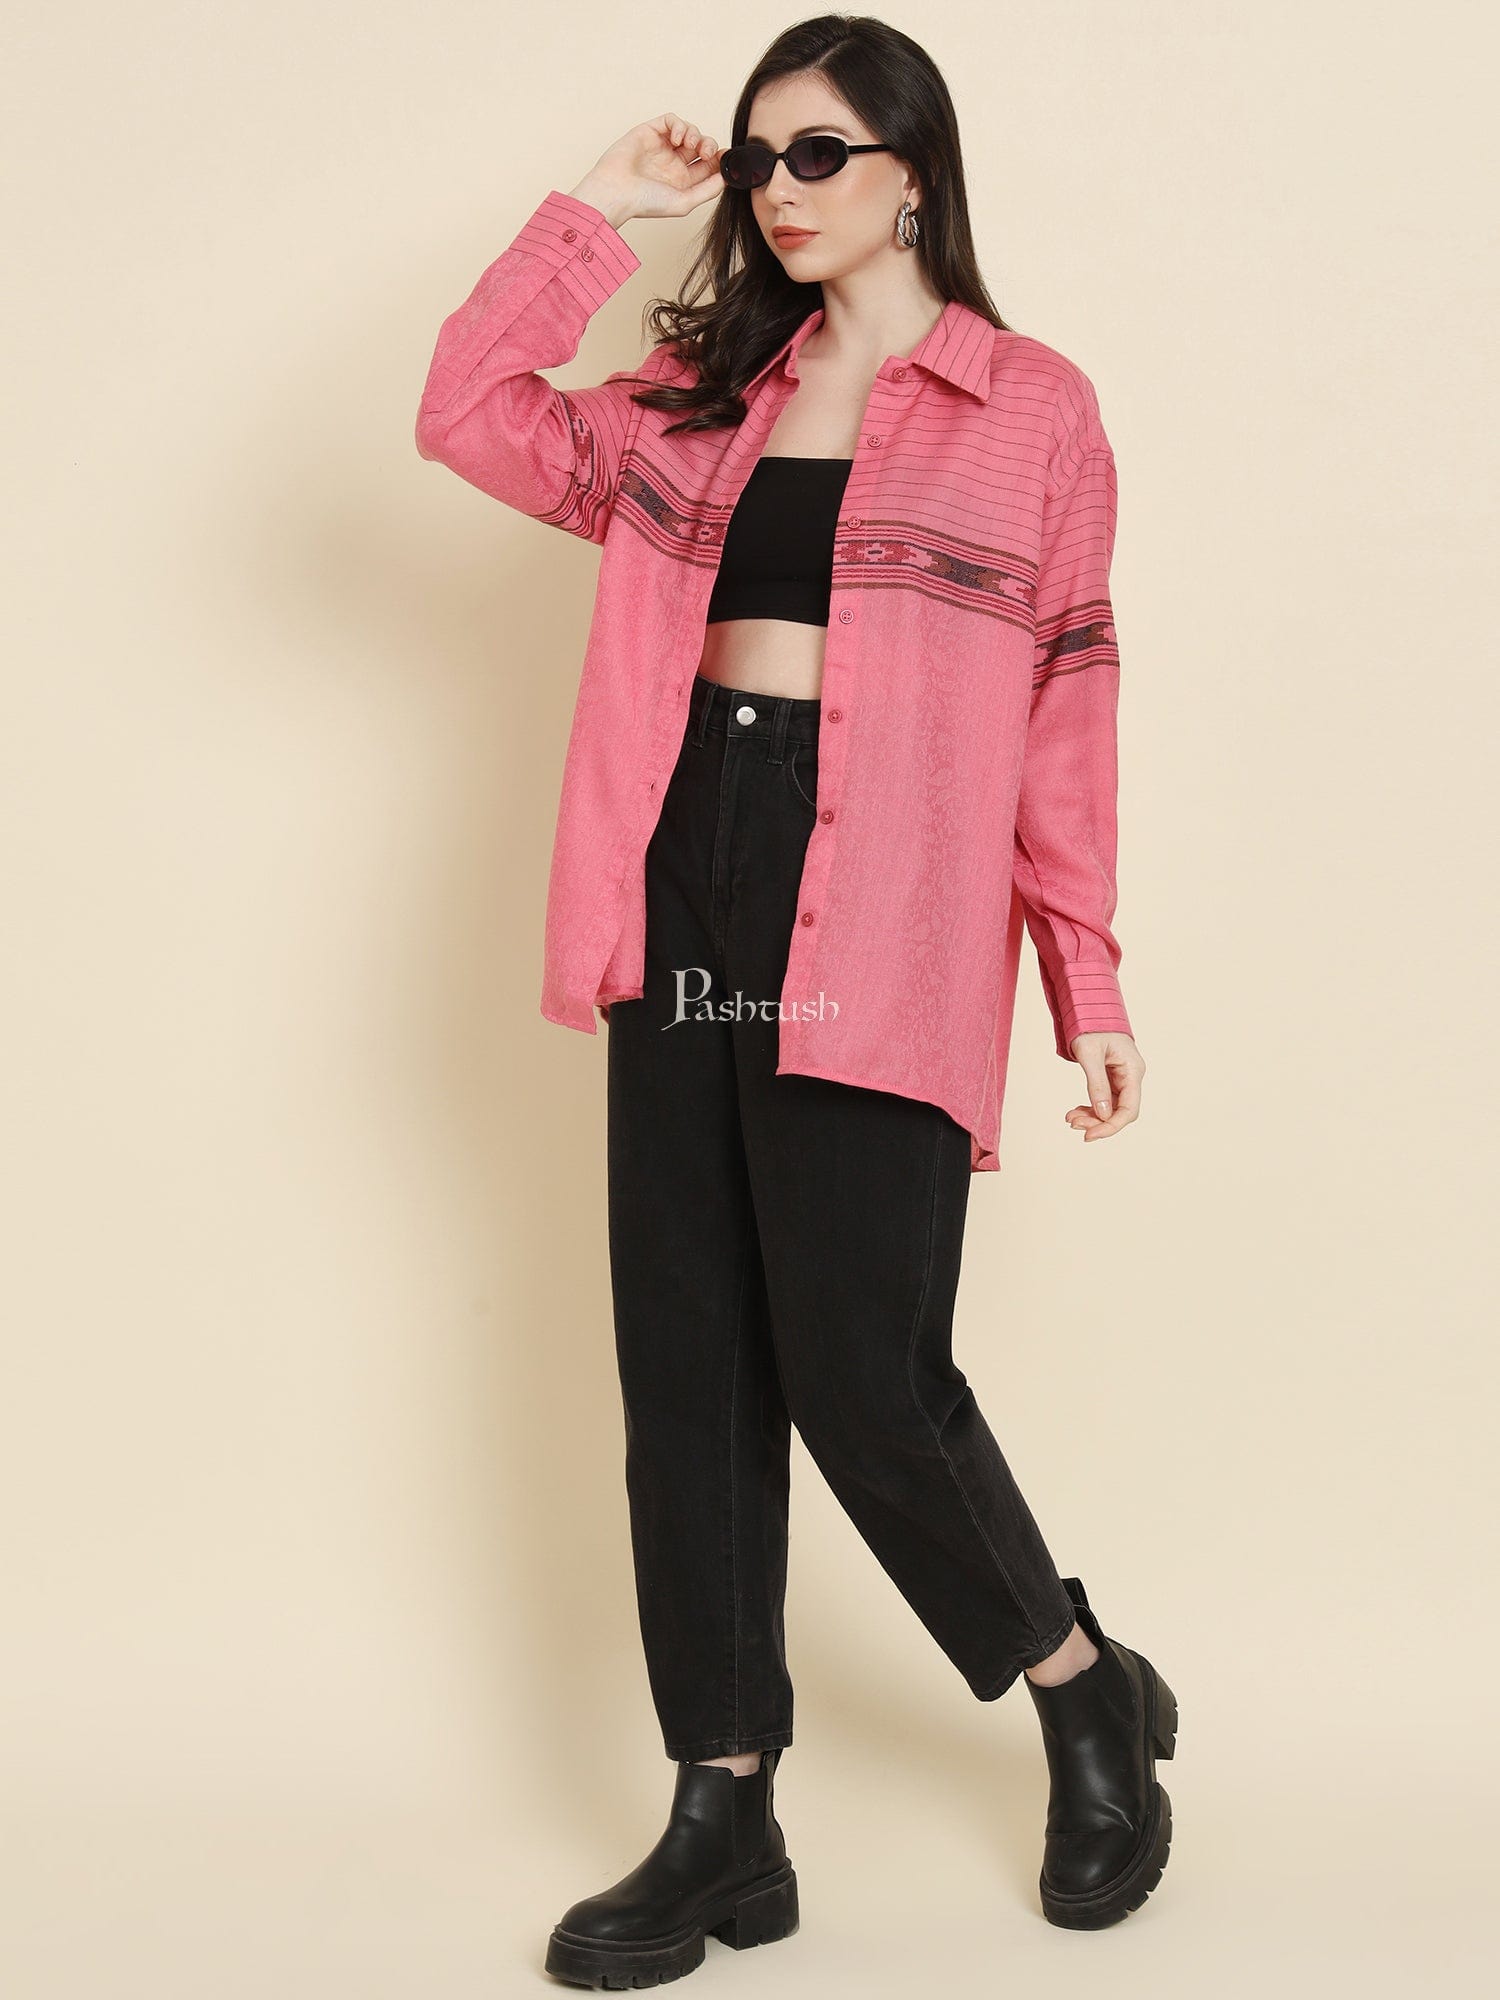 Jackets for women and girls at Rs 799.00 | Ludhiana| ID: 2852561634330